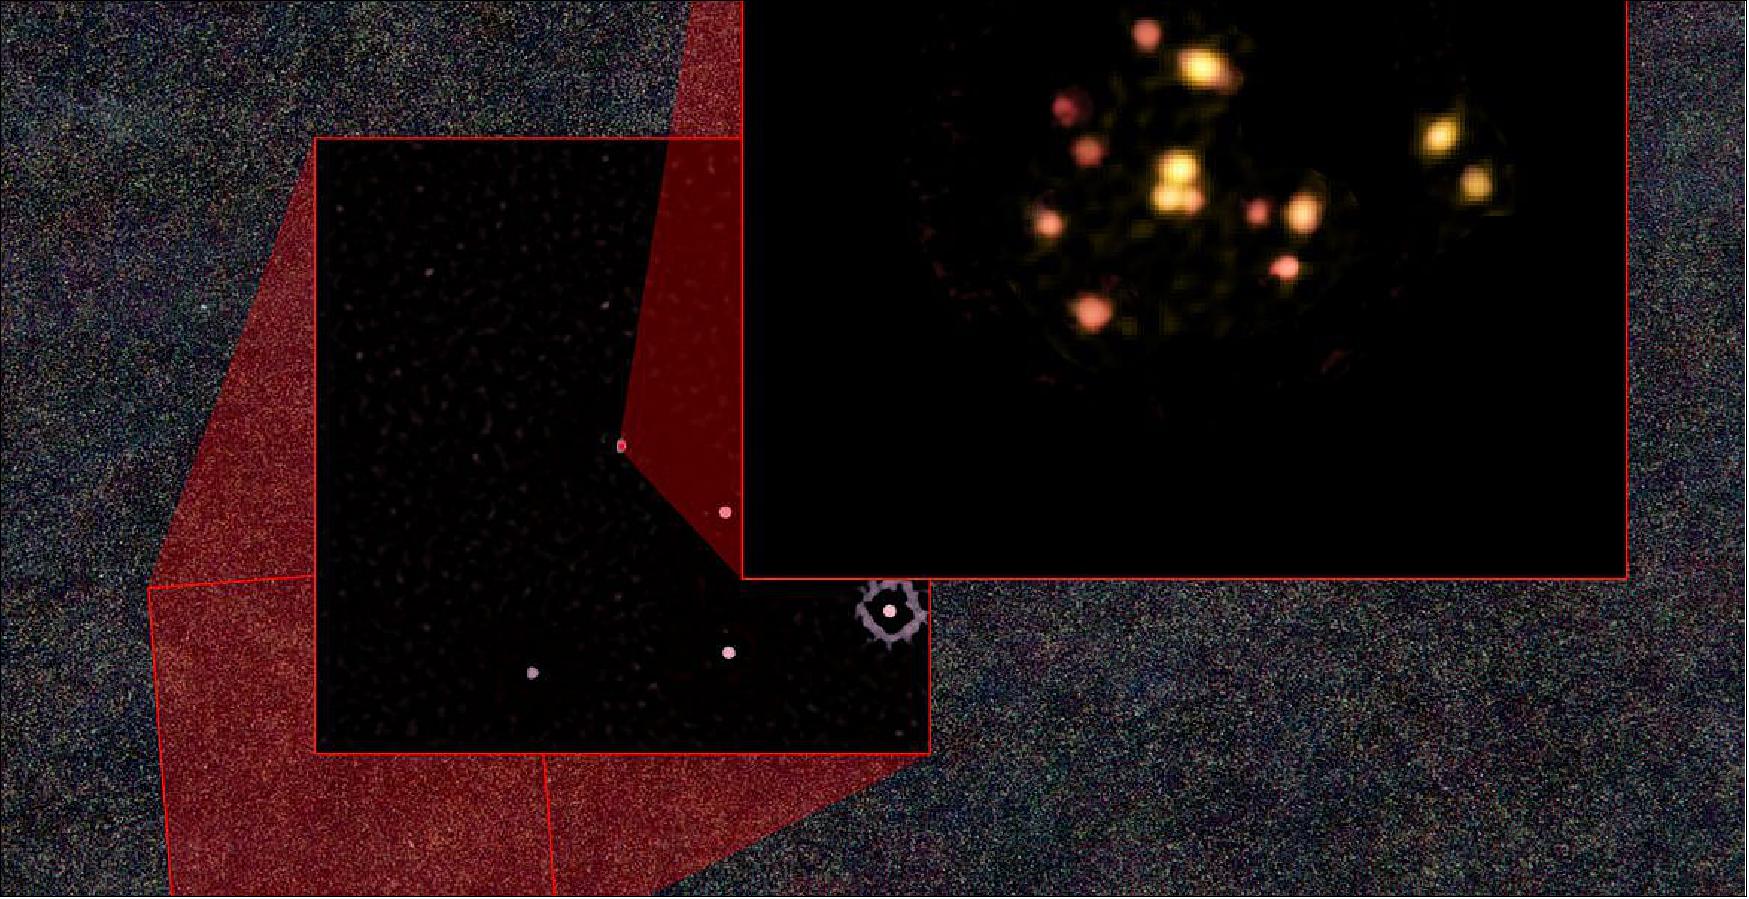 Figure 60: Zooming in to the galaxies discovered by ALMA that are evolving into a galaxy cluster. The outer field is from data taken by the Hershel Space Observatory. The middle image — a portion of a much-wider survey by NSF's South Pole Telescope — uncovered the distant galactic source that was studied by ALMA to reveal the 14 galaxies [image credit: ALMA (ESO/NAOJ/NRAO), T. Miller & S. Chapman et al.; Herschel; South Pole Telescope; (NRAO/AUI/NSF) B. Saxton]